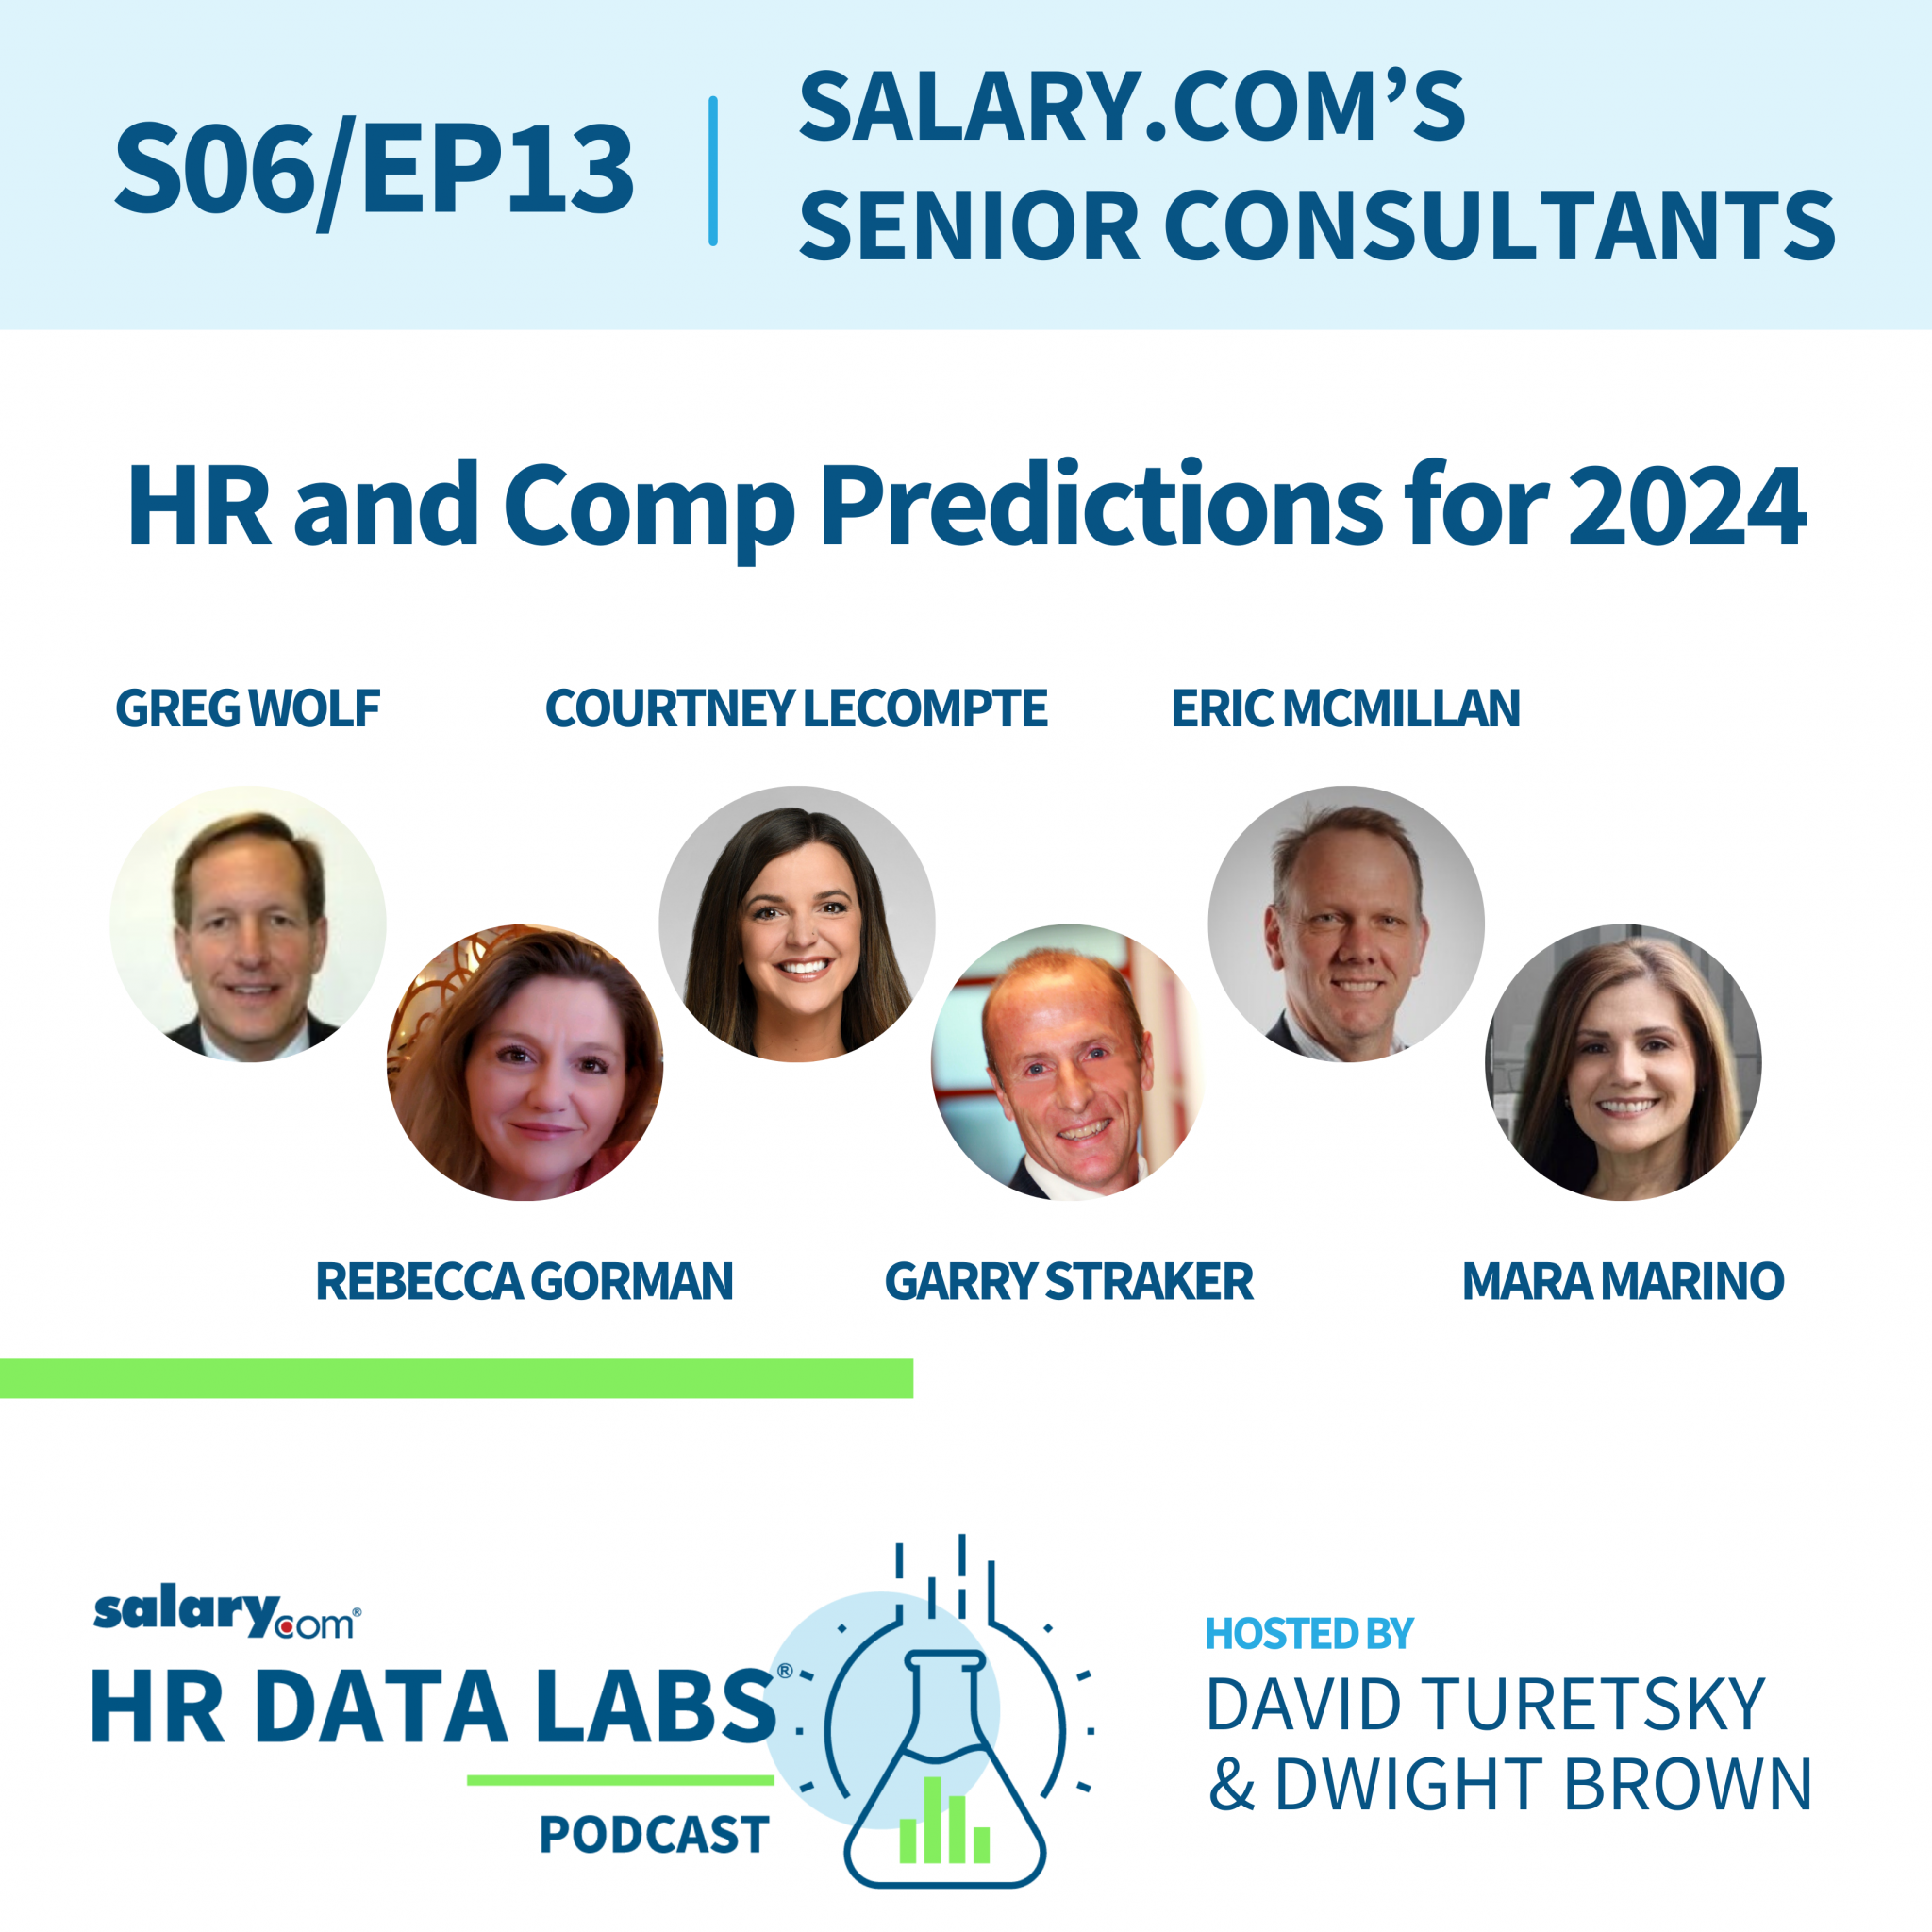 Salary.com's Senior Consultants - HR and Comp Predictions for 2024